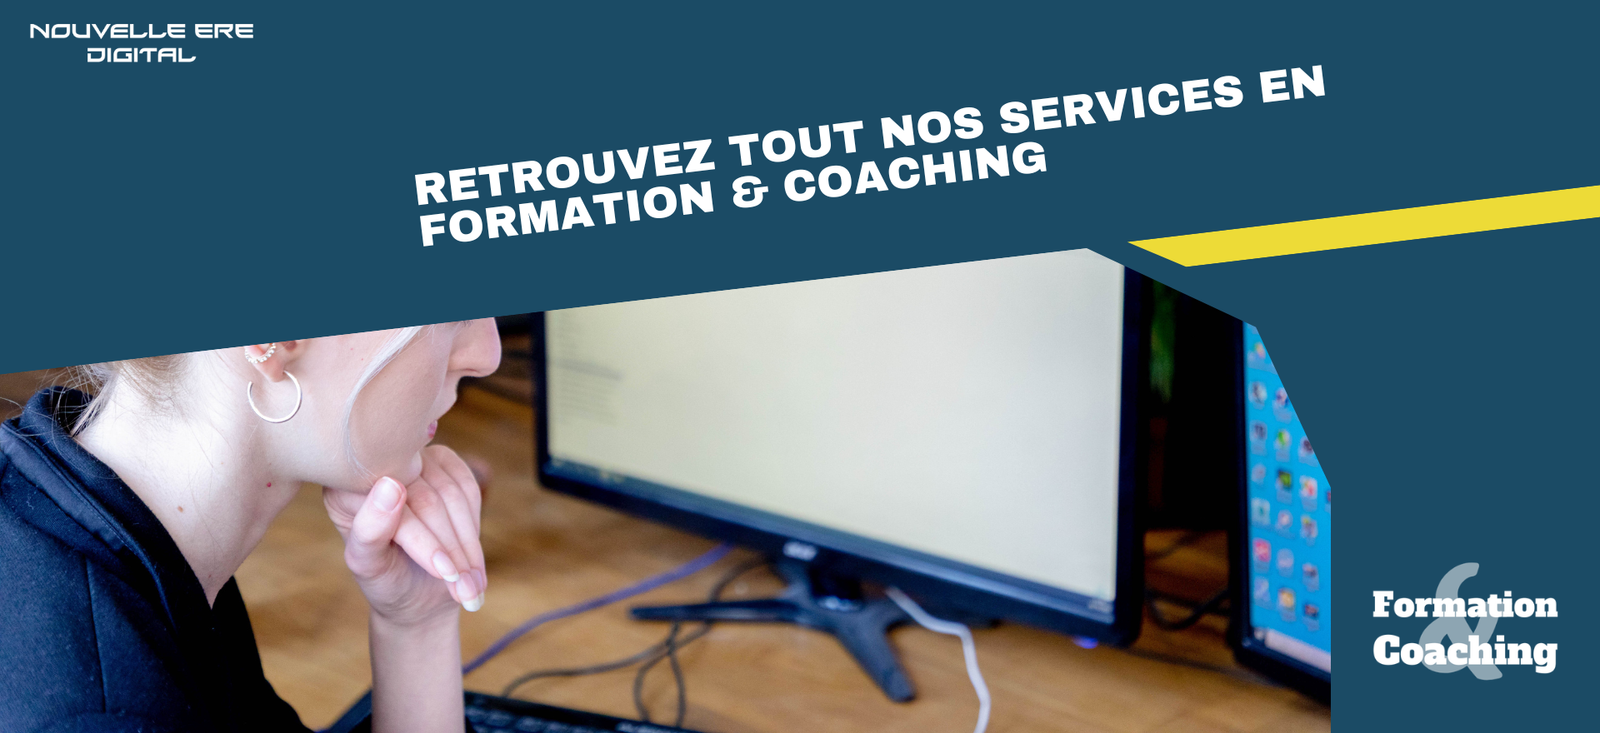 Formation & Coaching